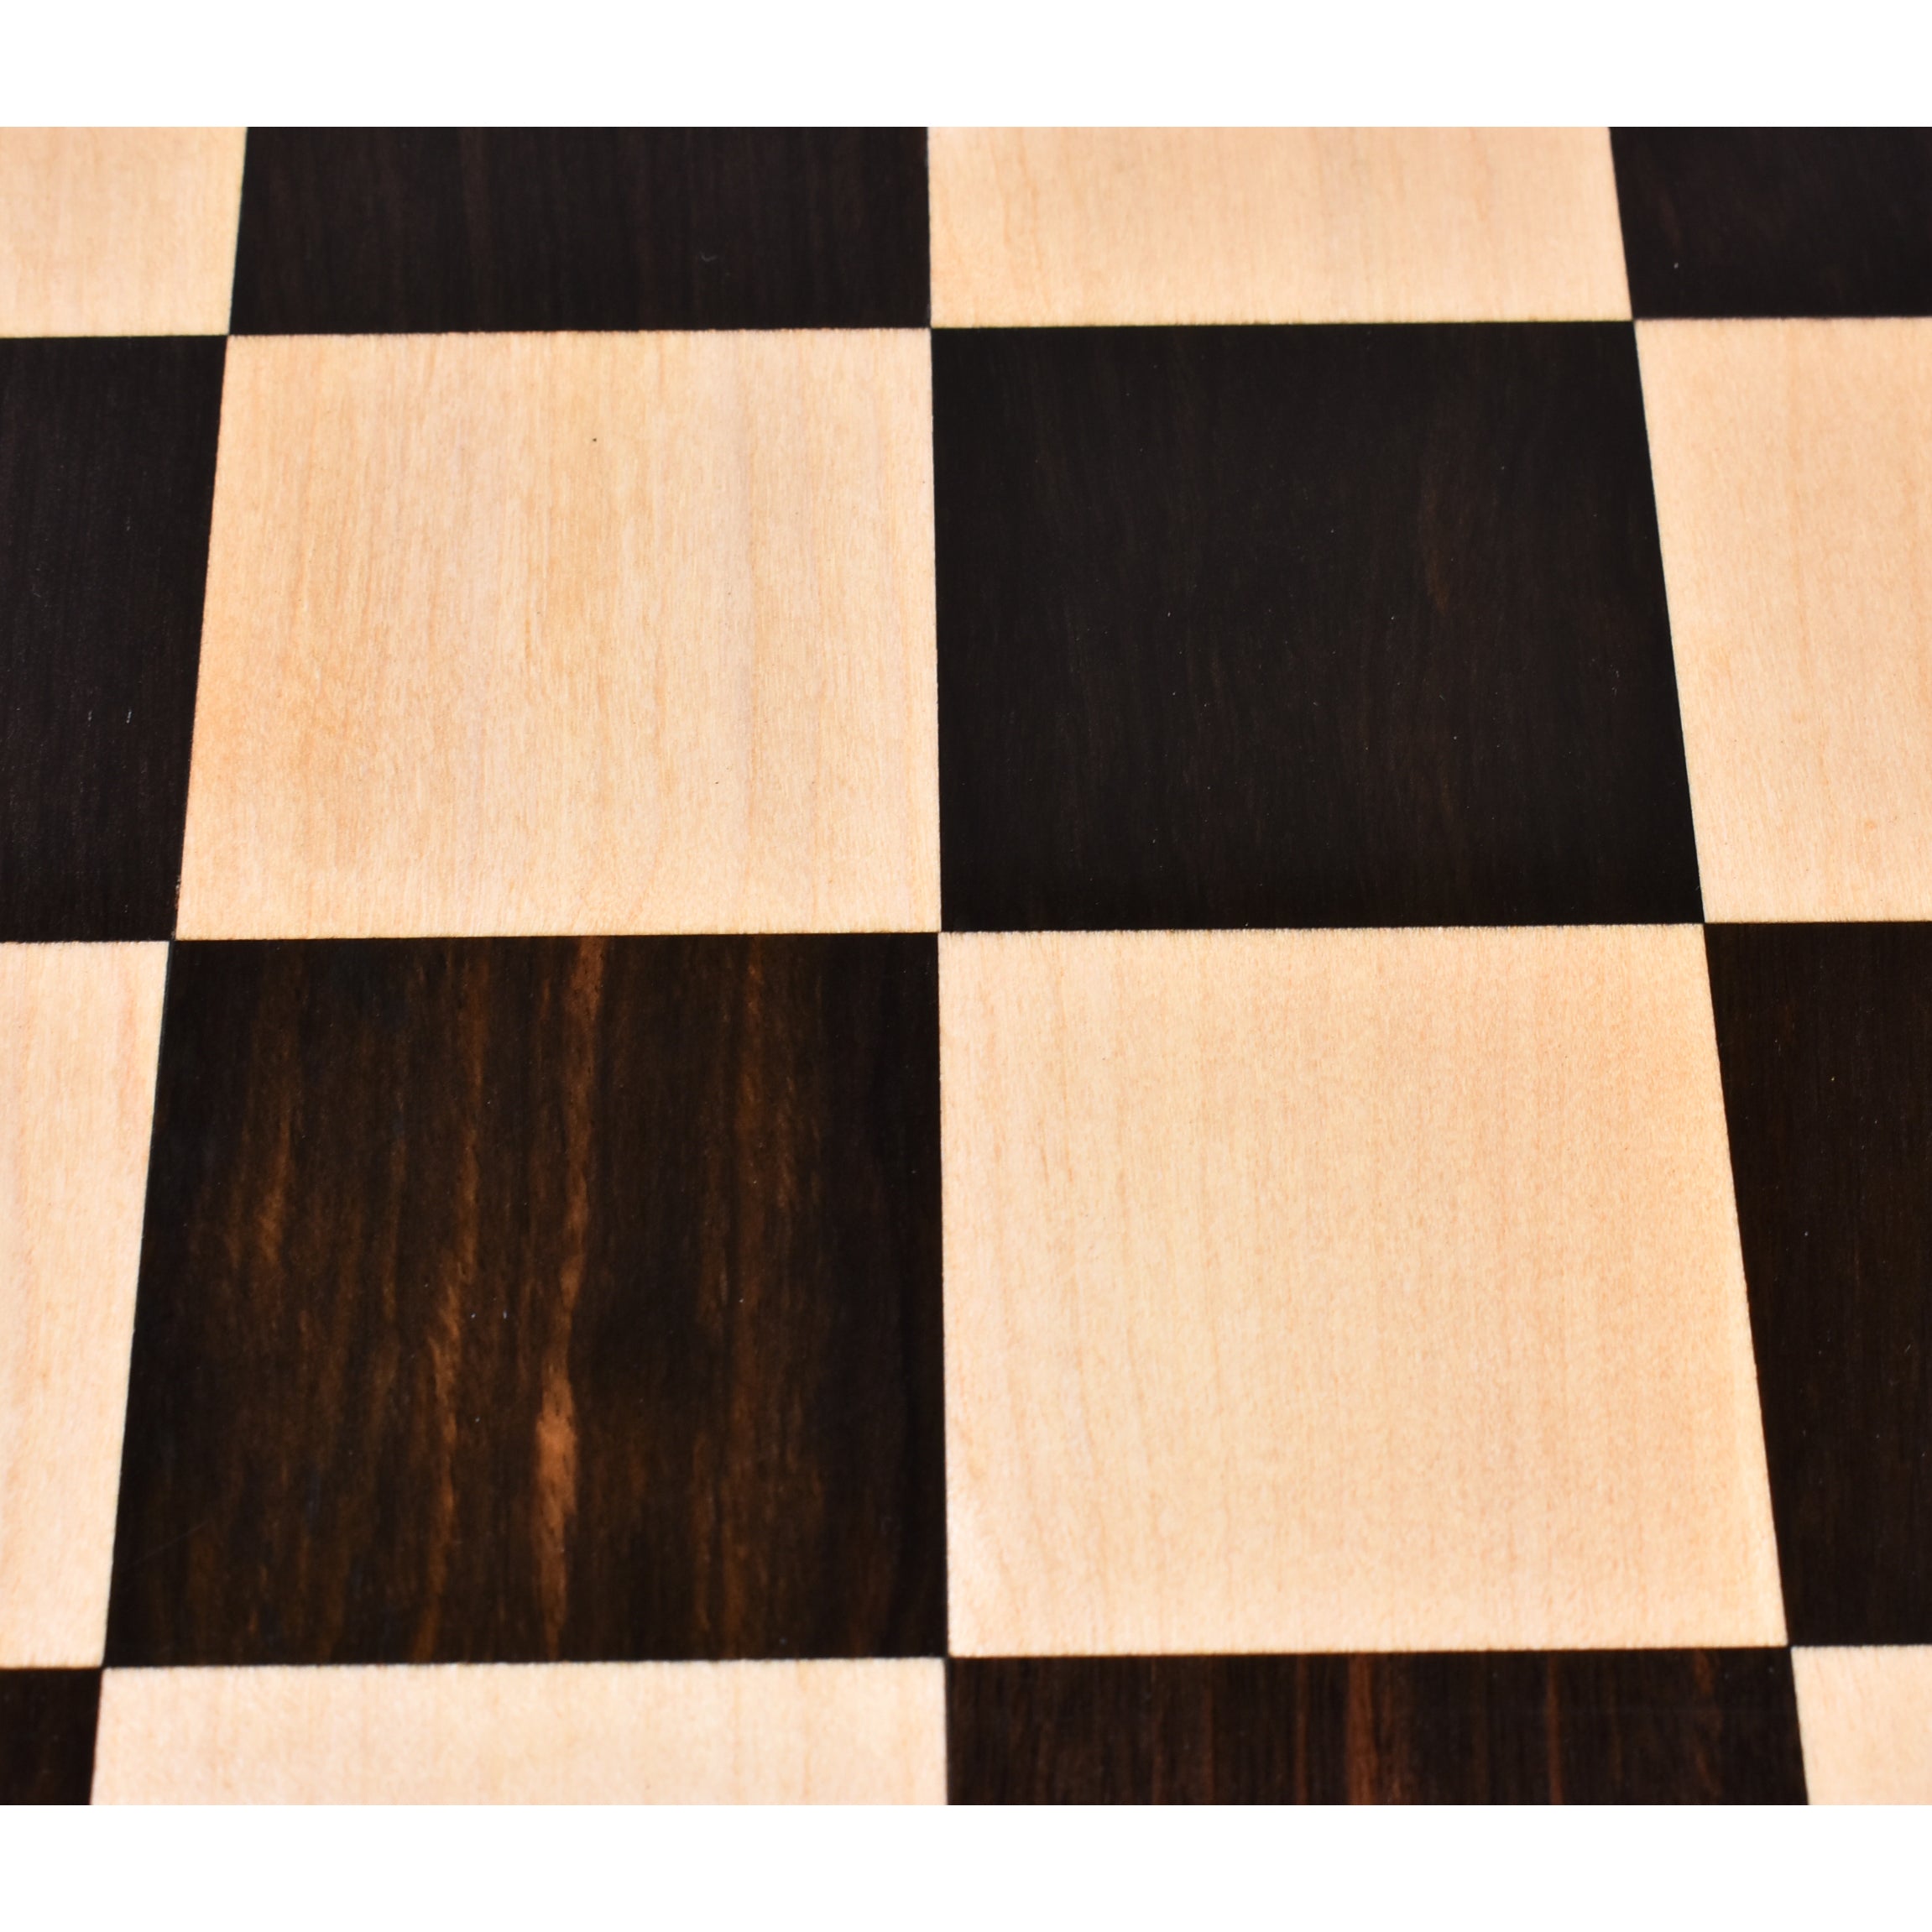 Combo of Reproduced French Lardy Staunton Chess Set - Pieces in Ebonised Boxwood with Board and Box